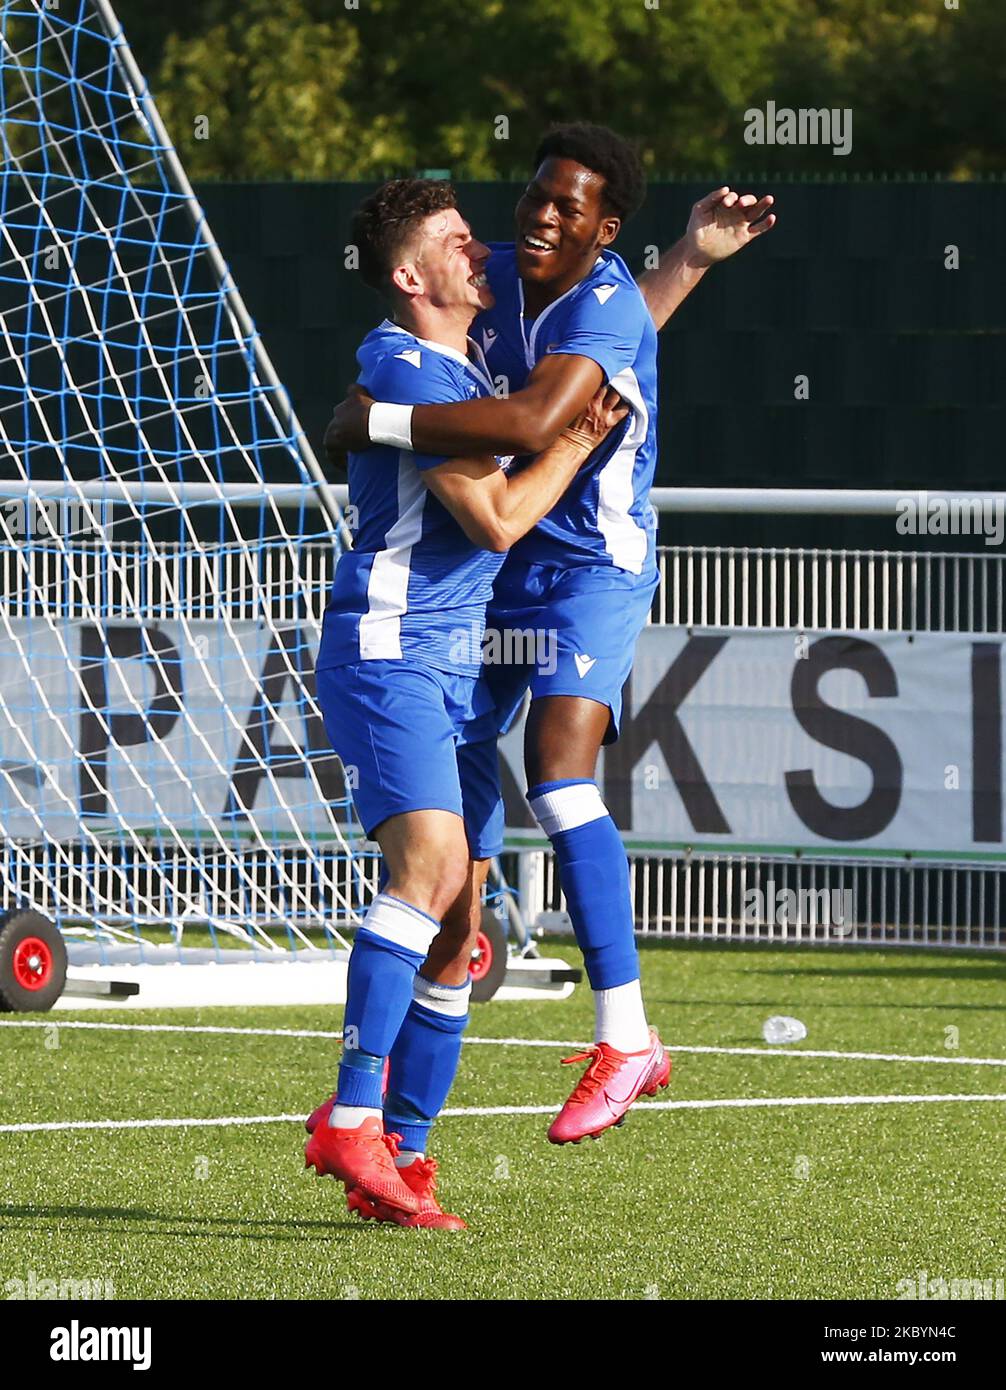 Joseph Agunbiade of Greys Atheltic celebrates Own Goal with Mitchel Hahn of Greys Atheltic during FA Cup - Preliminary Round between Grays Athletic and Witham Town at Parkside, Park Lane, Aveley, UK on 12th September 2020. (Photo by Action Foto Sport/NurPhoto) Stock Photo